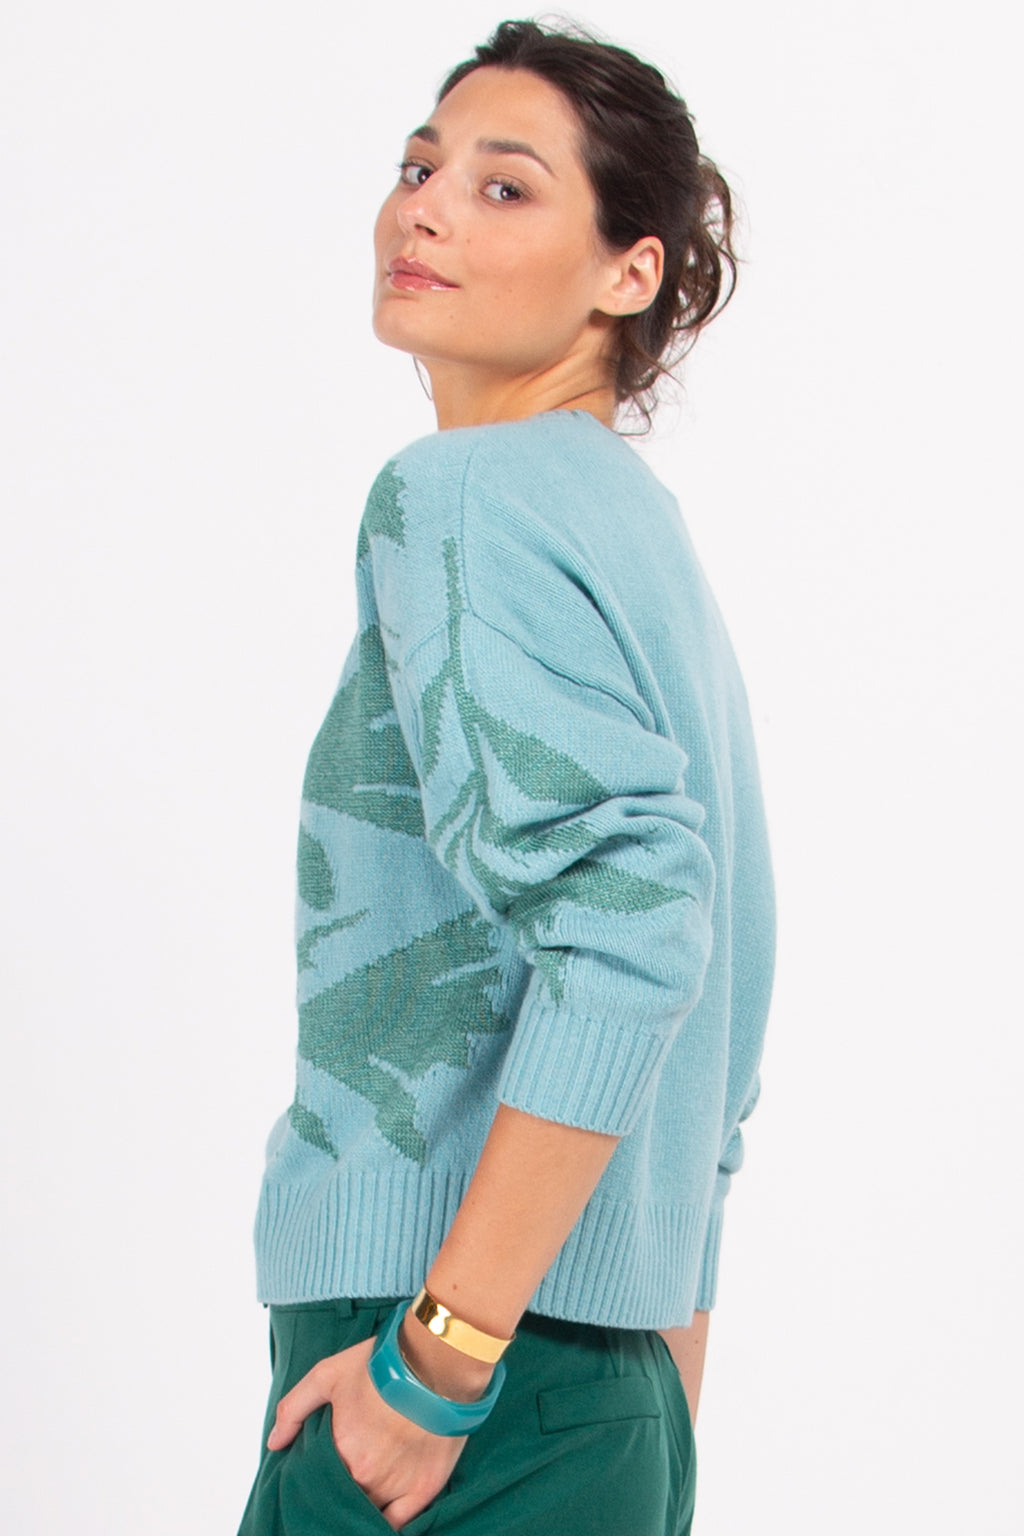 Mata knitted sweater with teal leaf